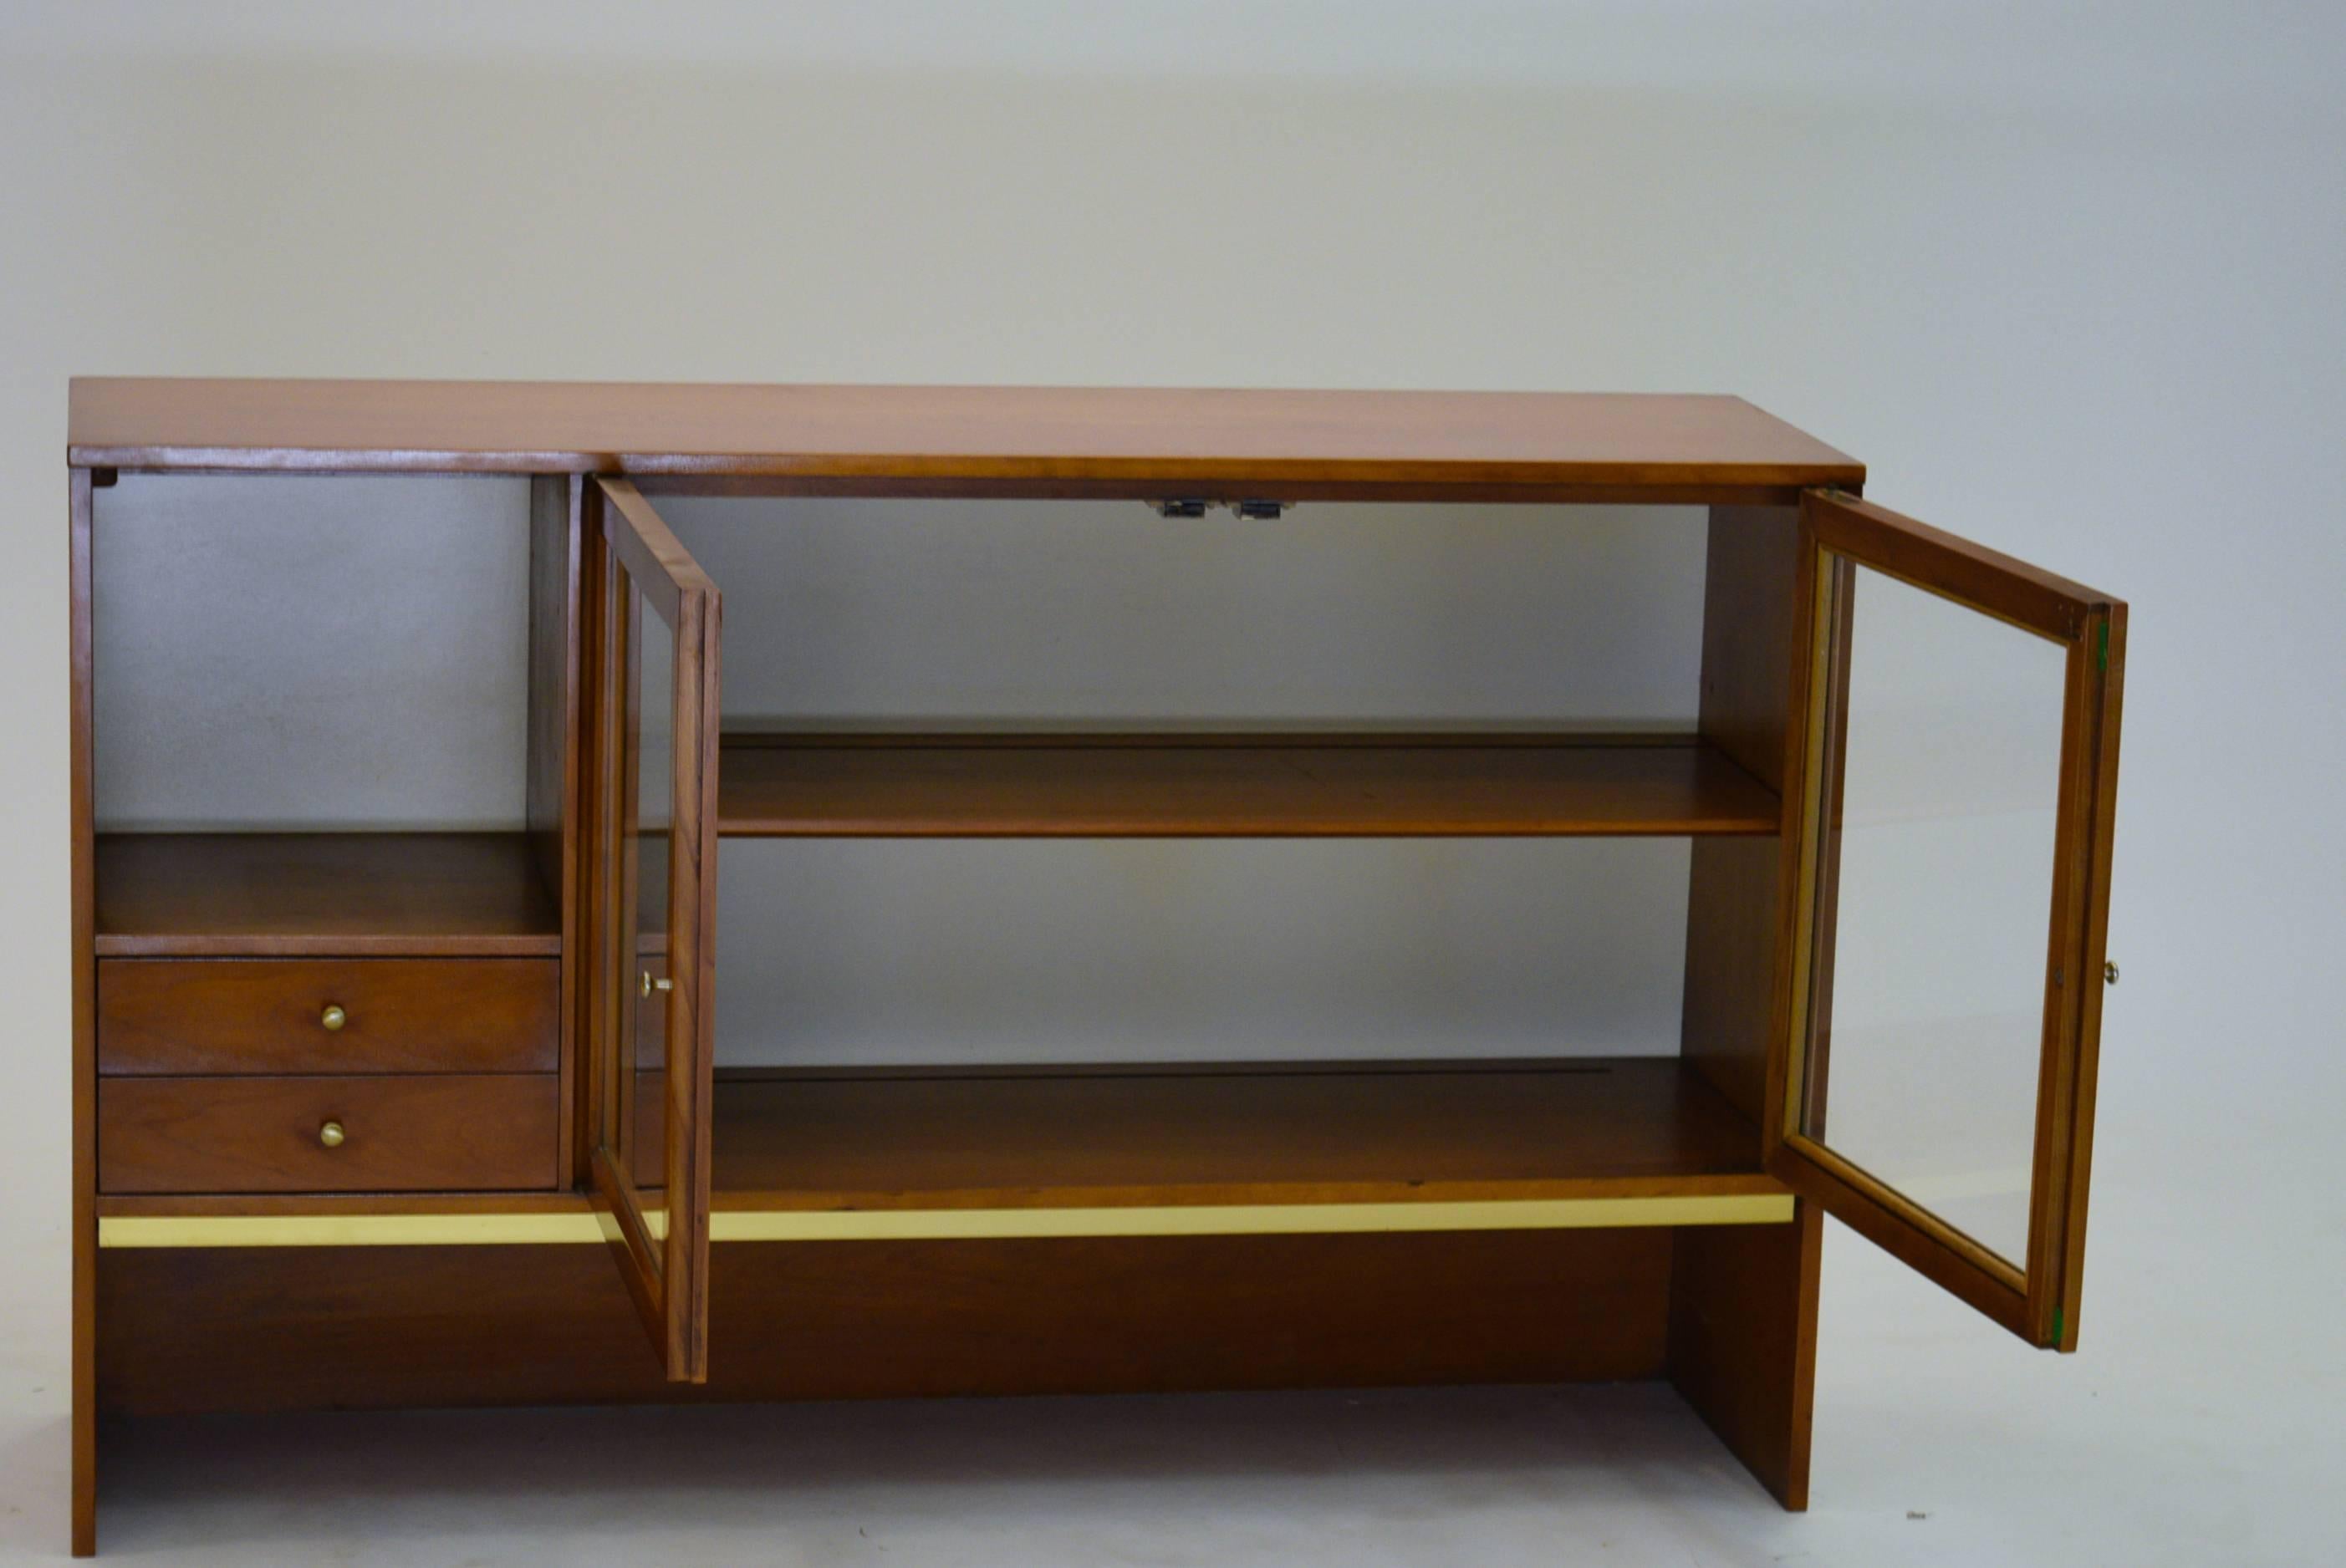 Hutch for Drexel Cabinets, from the Sun Coast series.

A petite unit measuring only 48